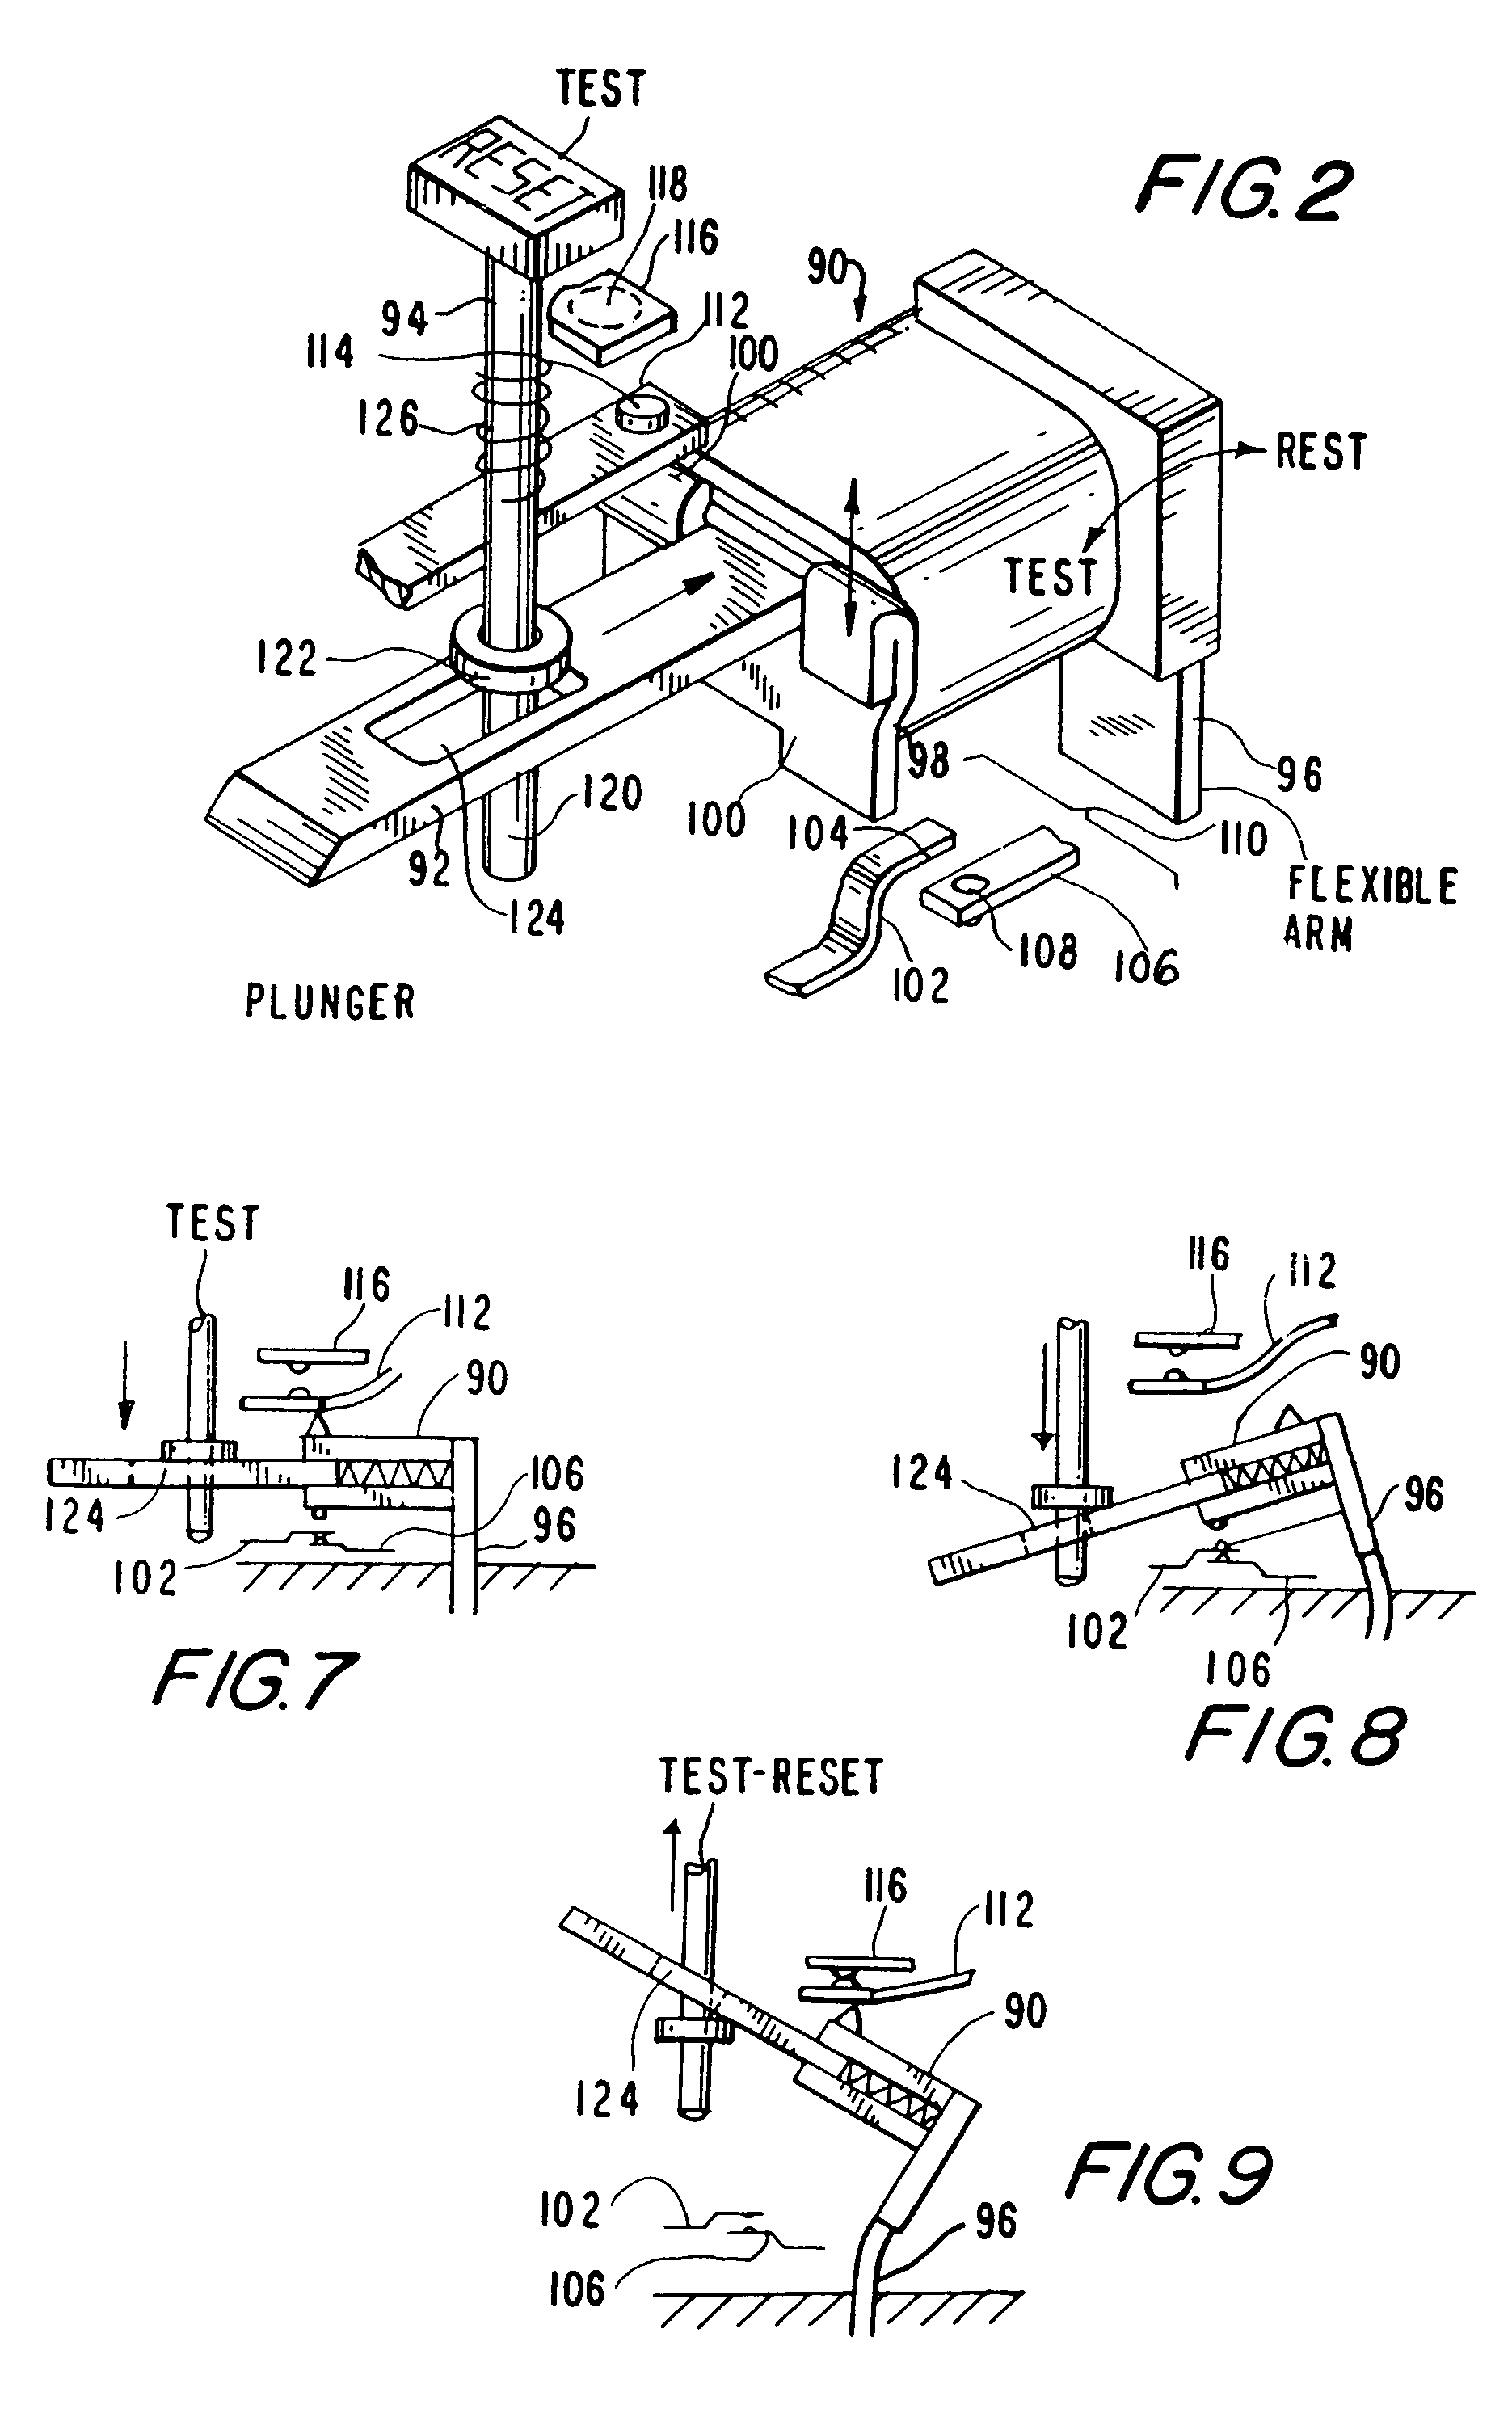 Circuit interrupting device with single throw, double mode button for test-reset function